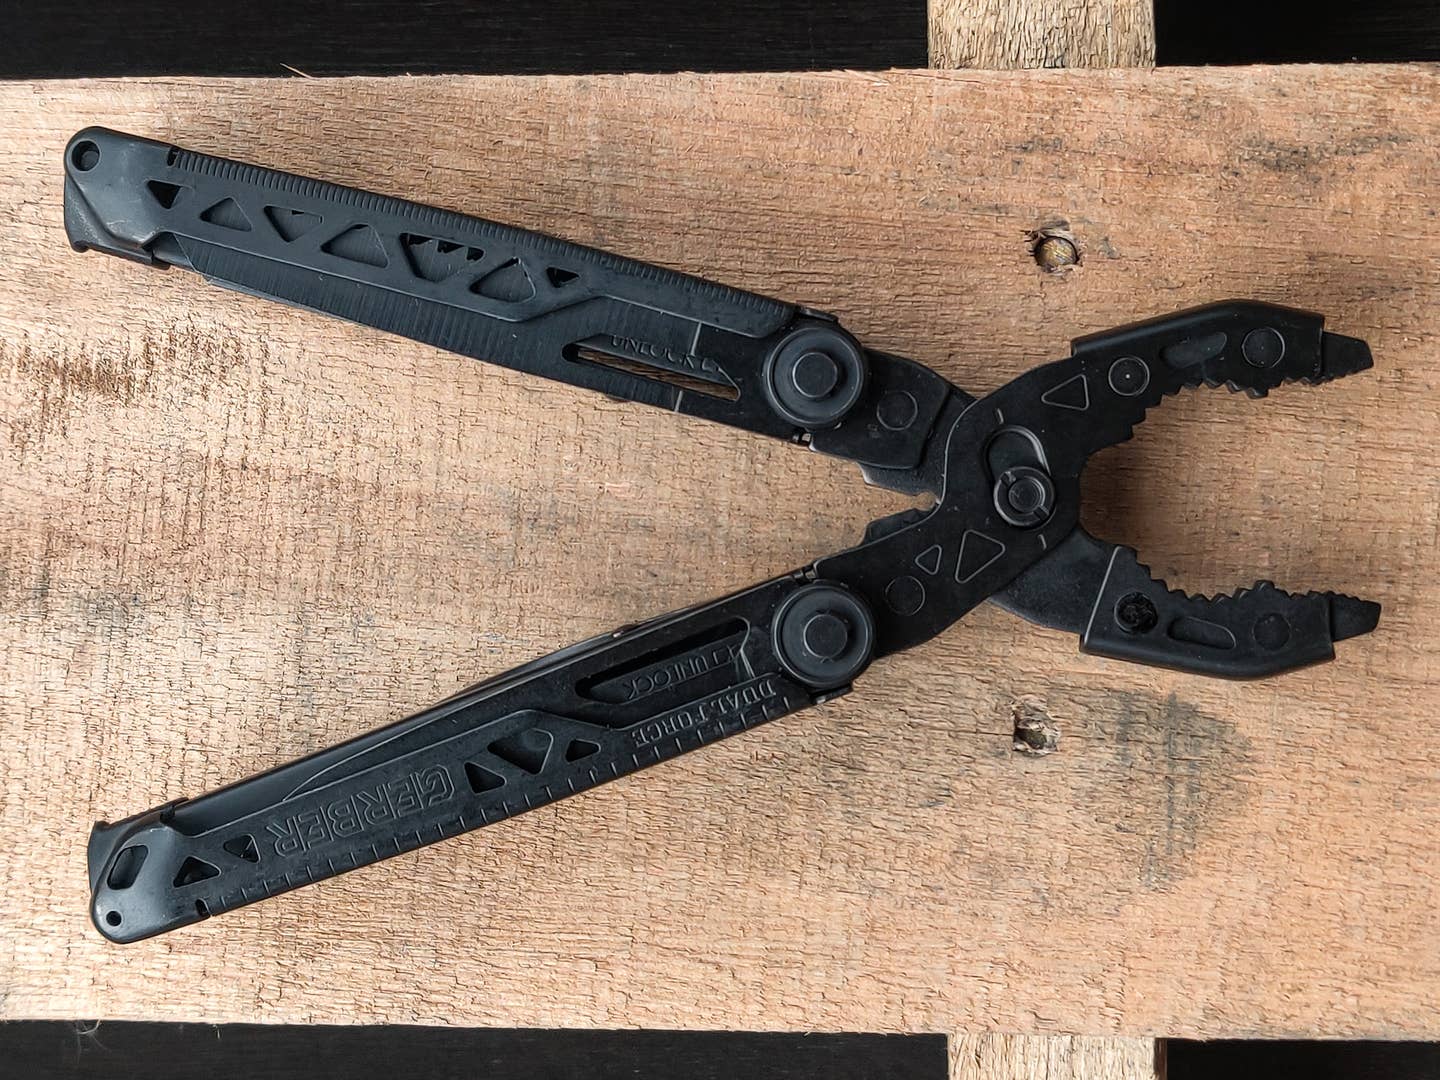 Gerber's Dual-Force multitool laying on a wood pallet